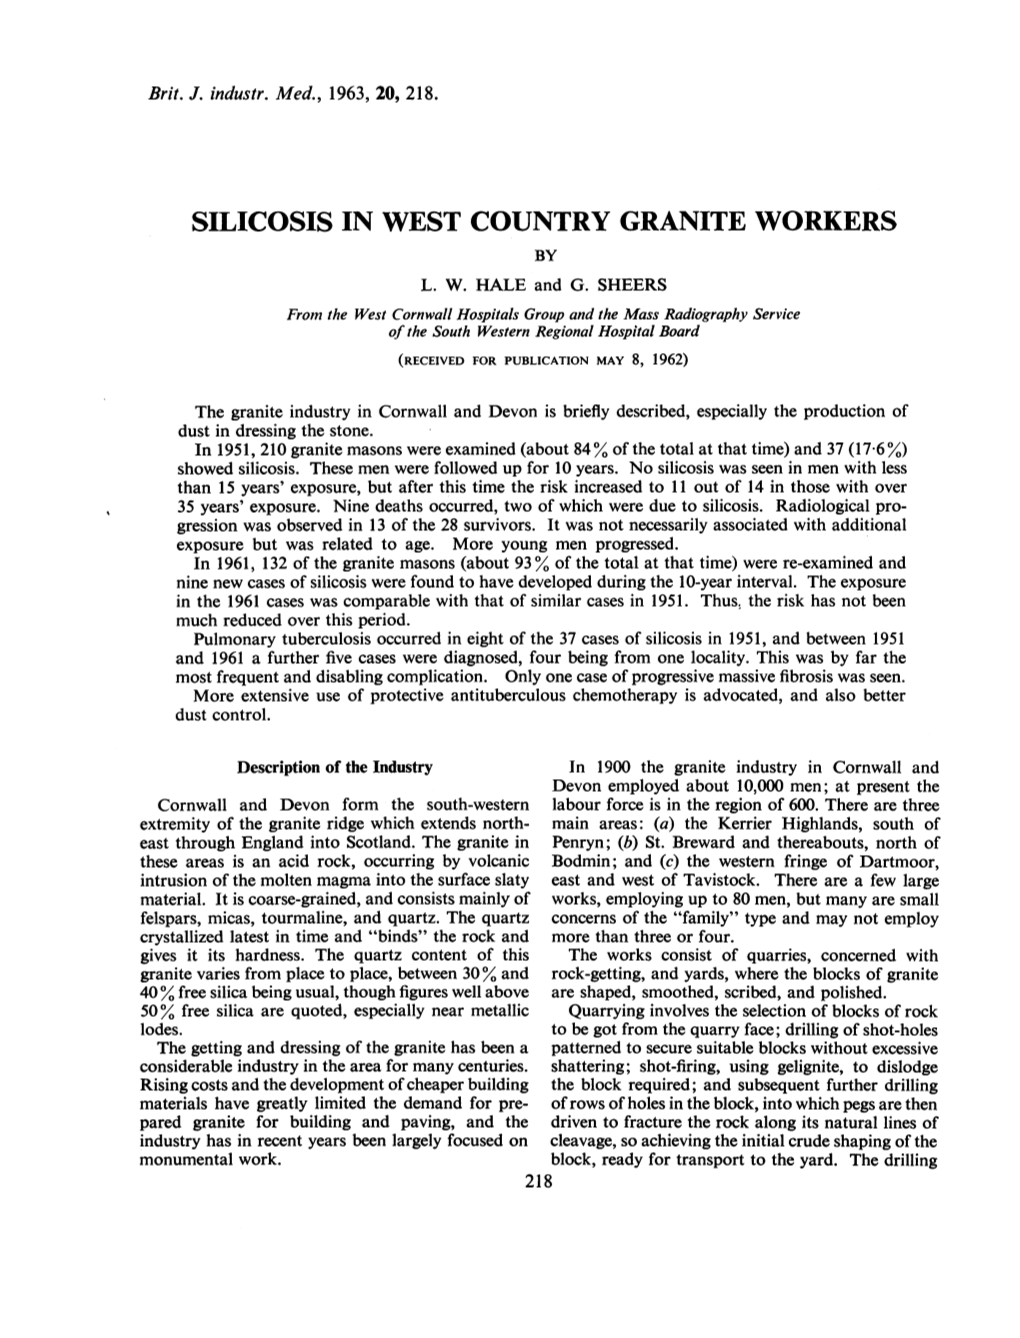 Silicosis in West Country Granite Workers by L